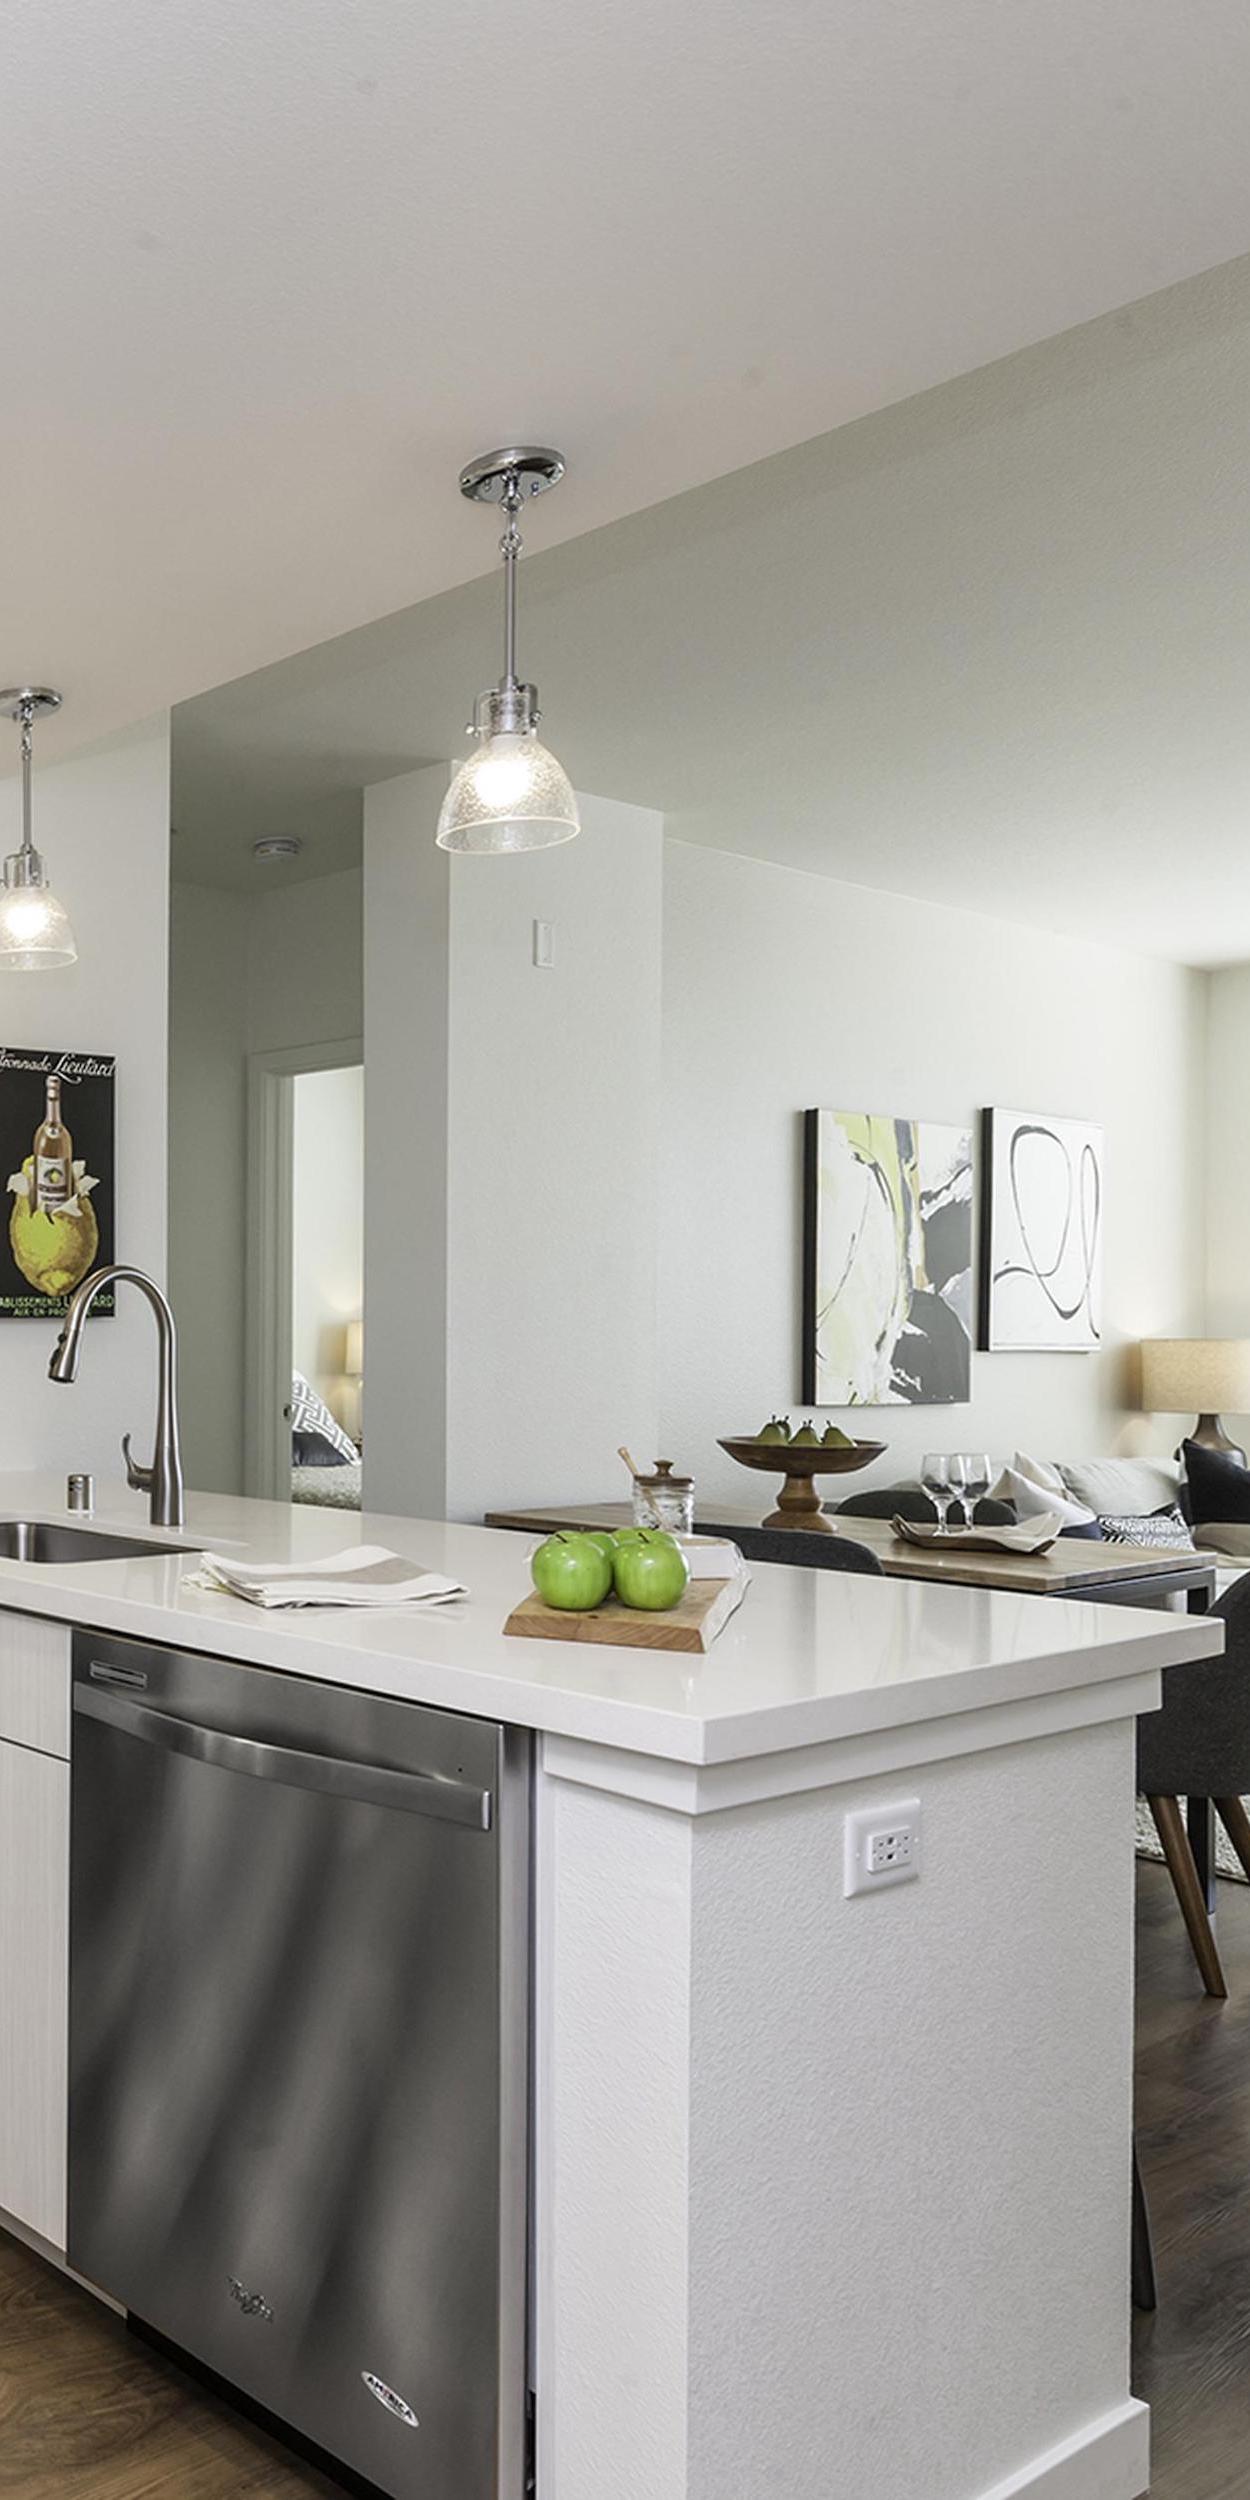 Apartments Foster City CA-One Hundred Grand Kitchen with Modern Lighting and Matching Appliances